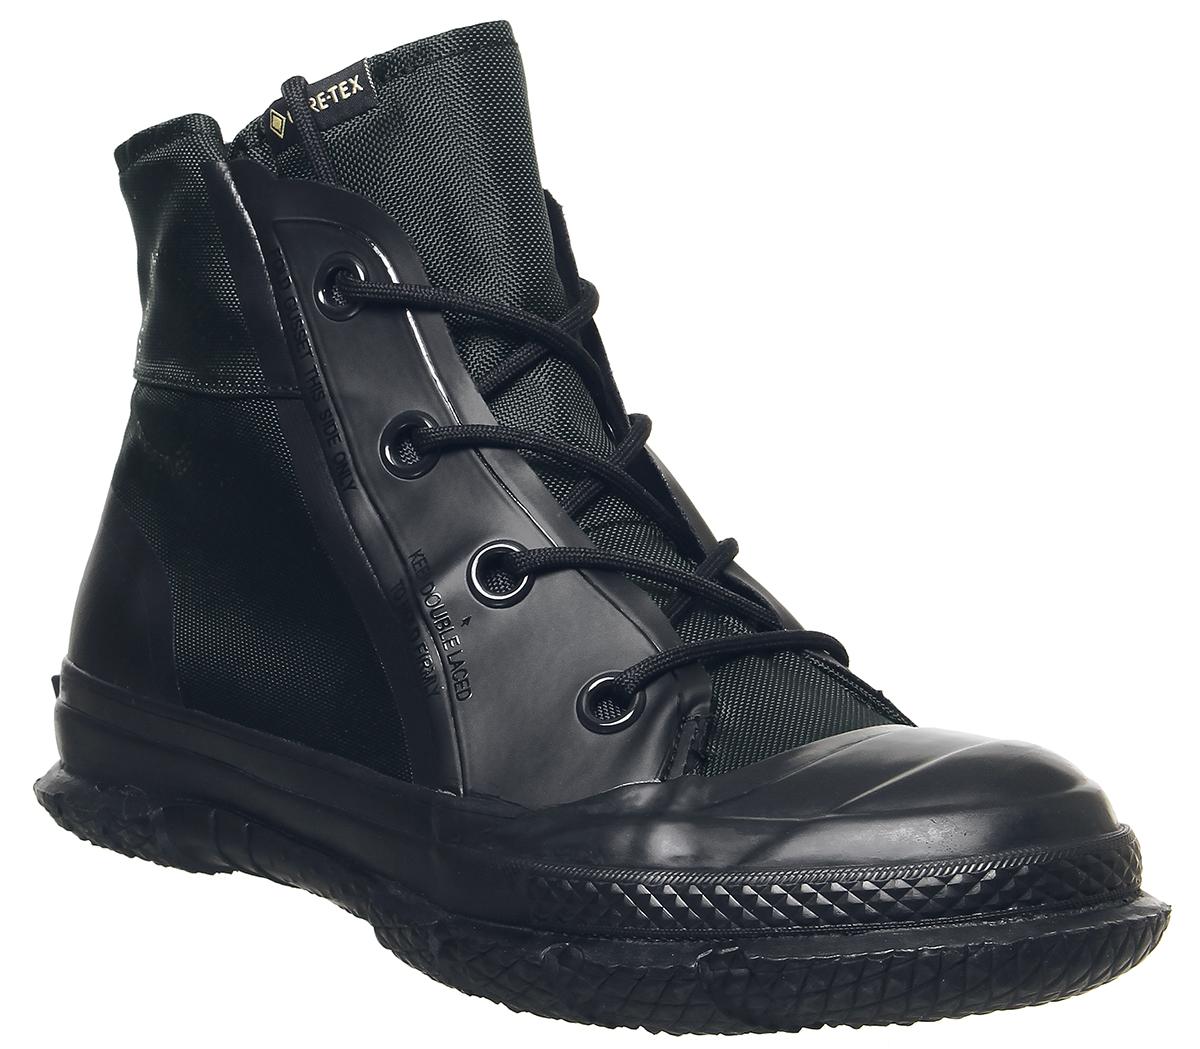 Converse Gore Tex Boots : Converse Chuck 70 Gore Tex How Where To Buy / Free delivery and returns on ebay plus items for plus members.